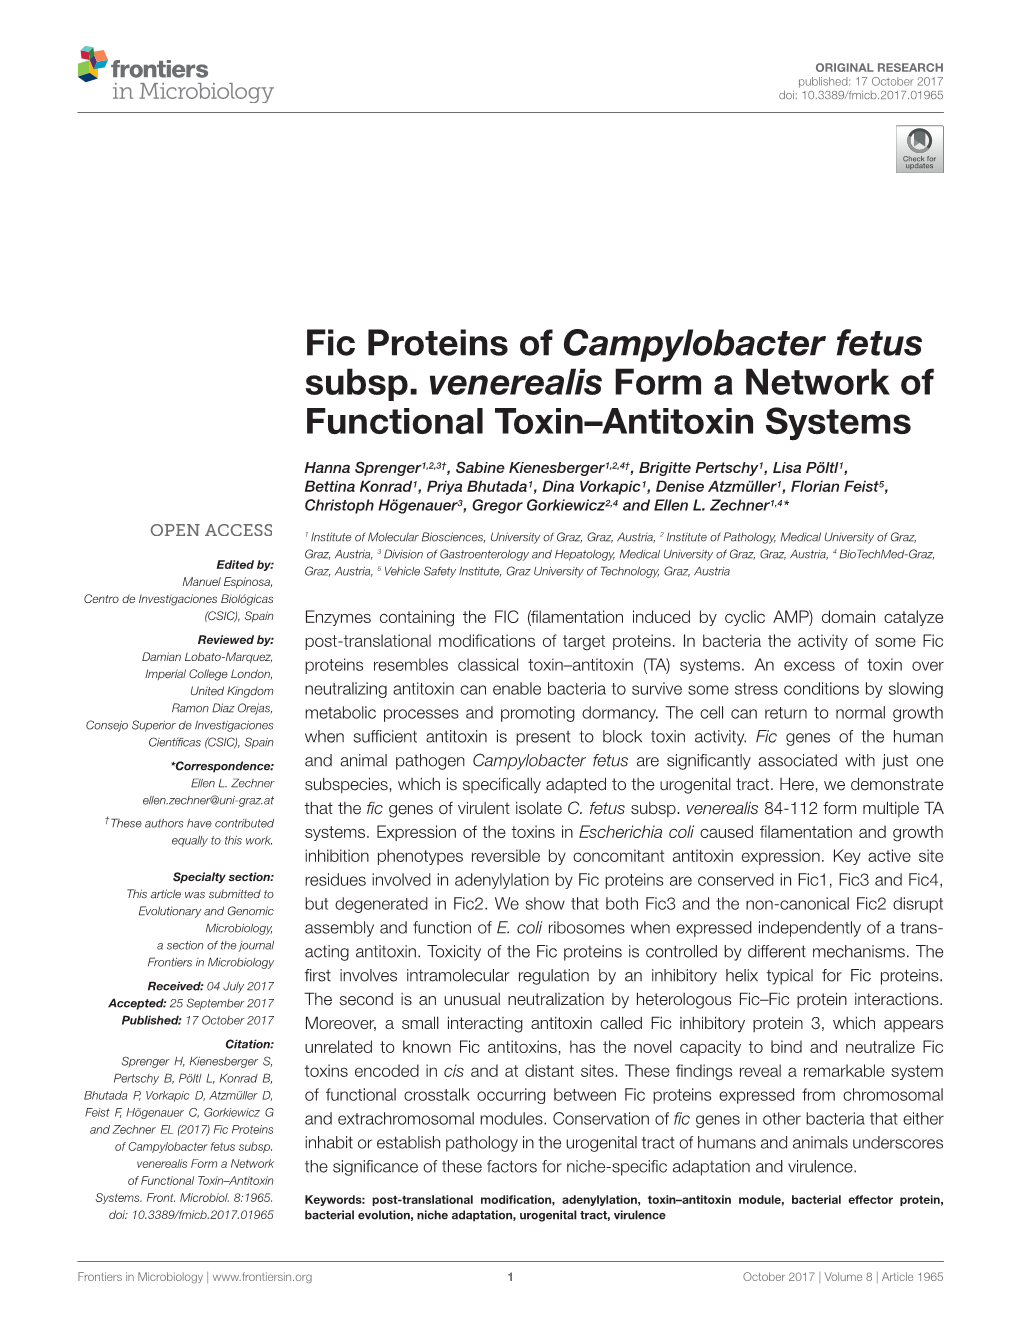 Fic Proteins of Campylobacter Fetus Subsp. Venerealis Form a Network of Functional Toxin–Antitoxin Systems